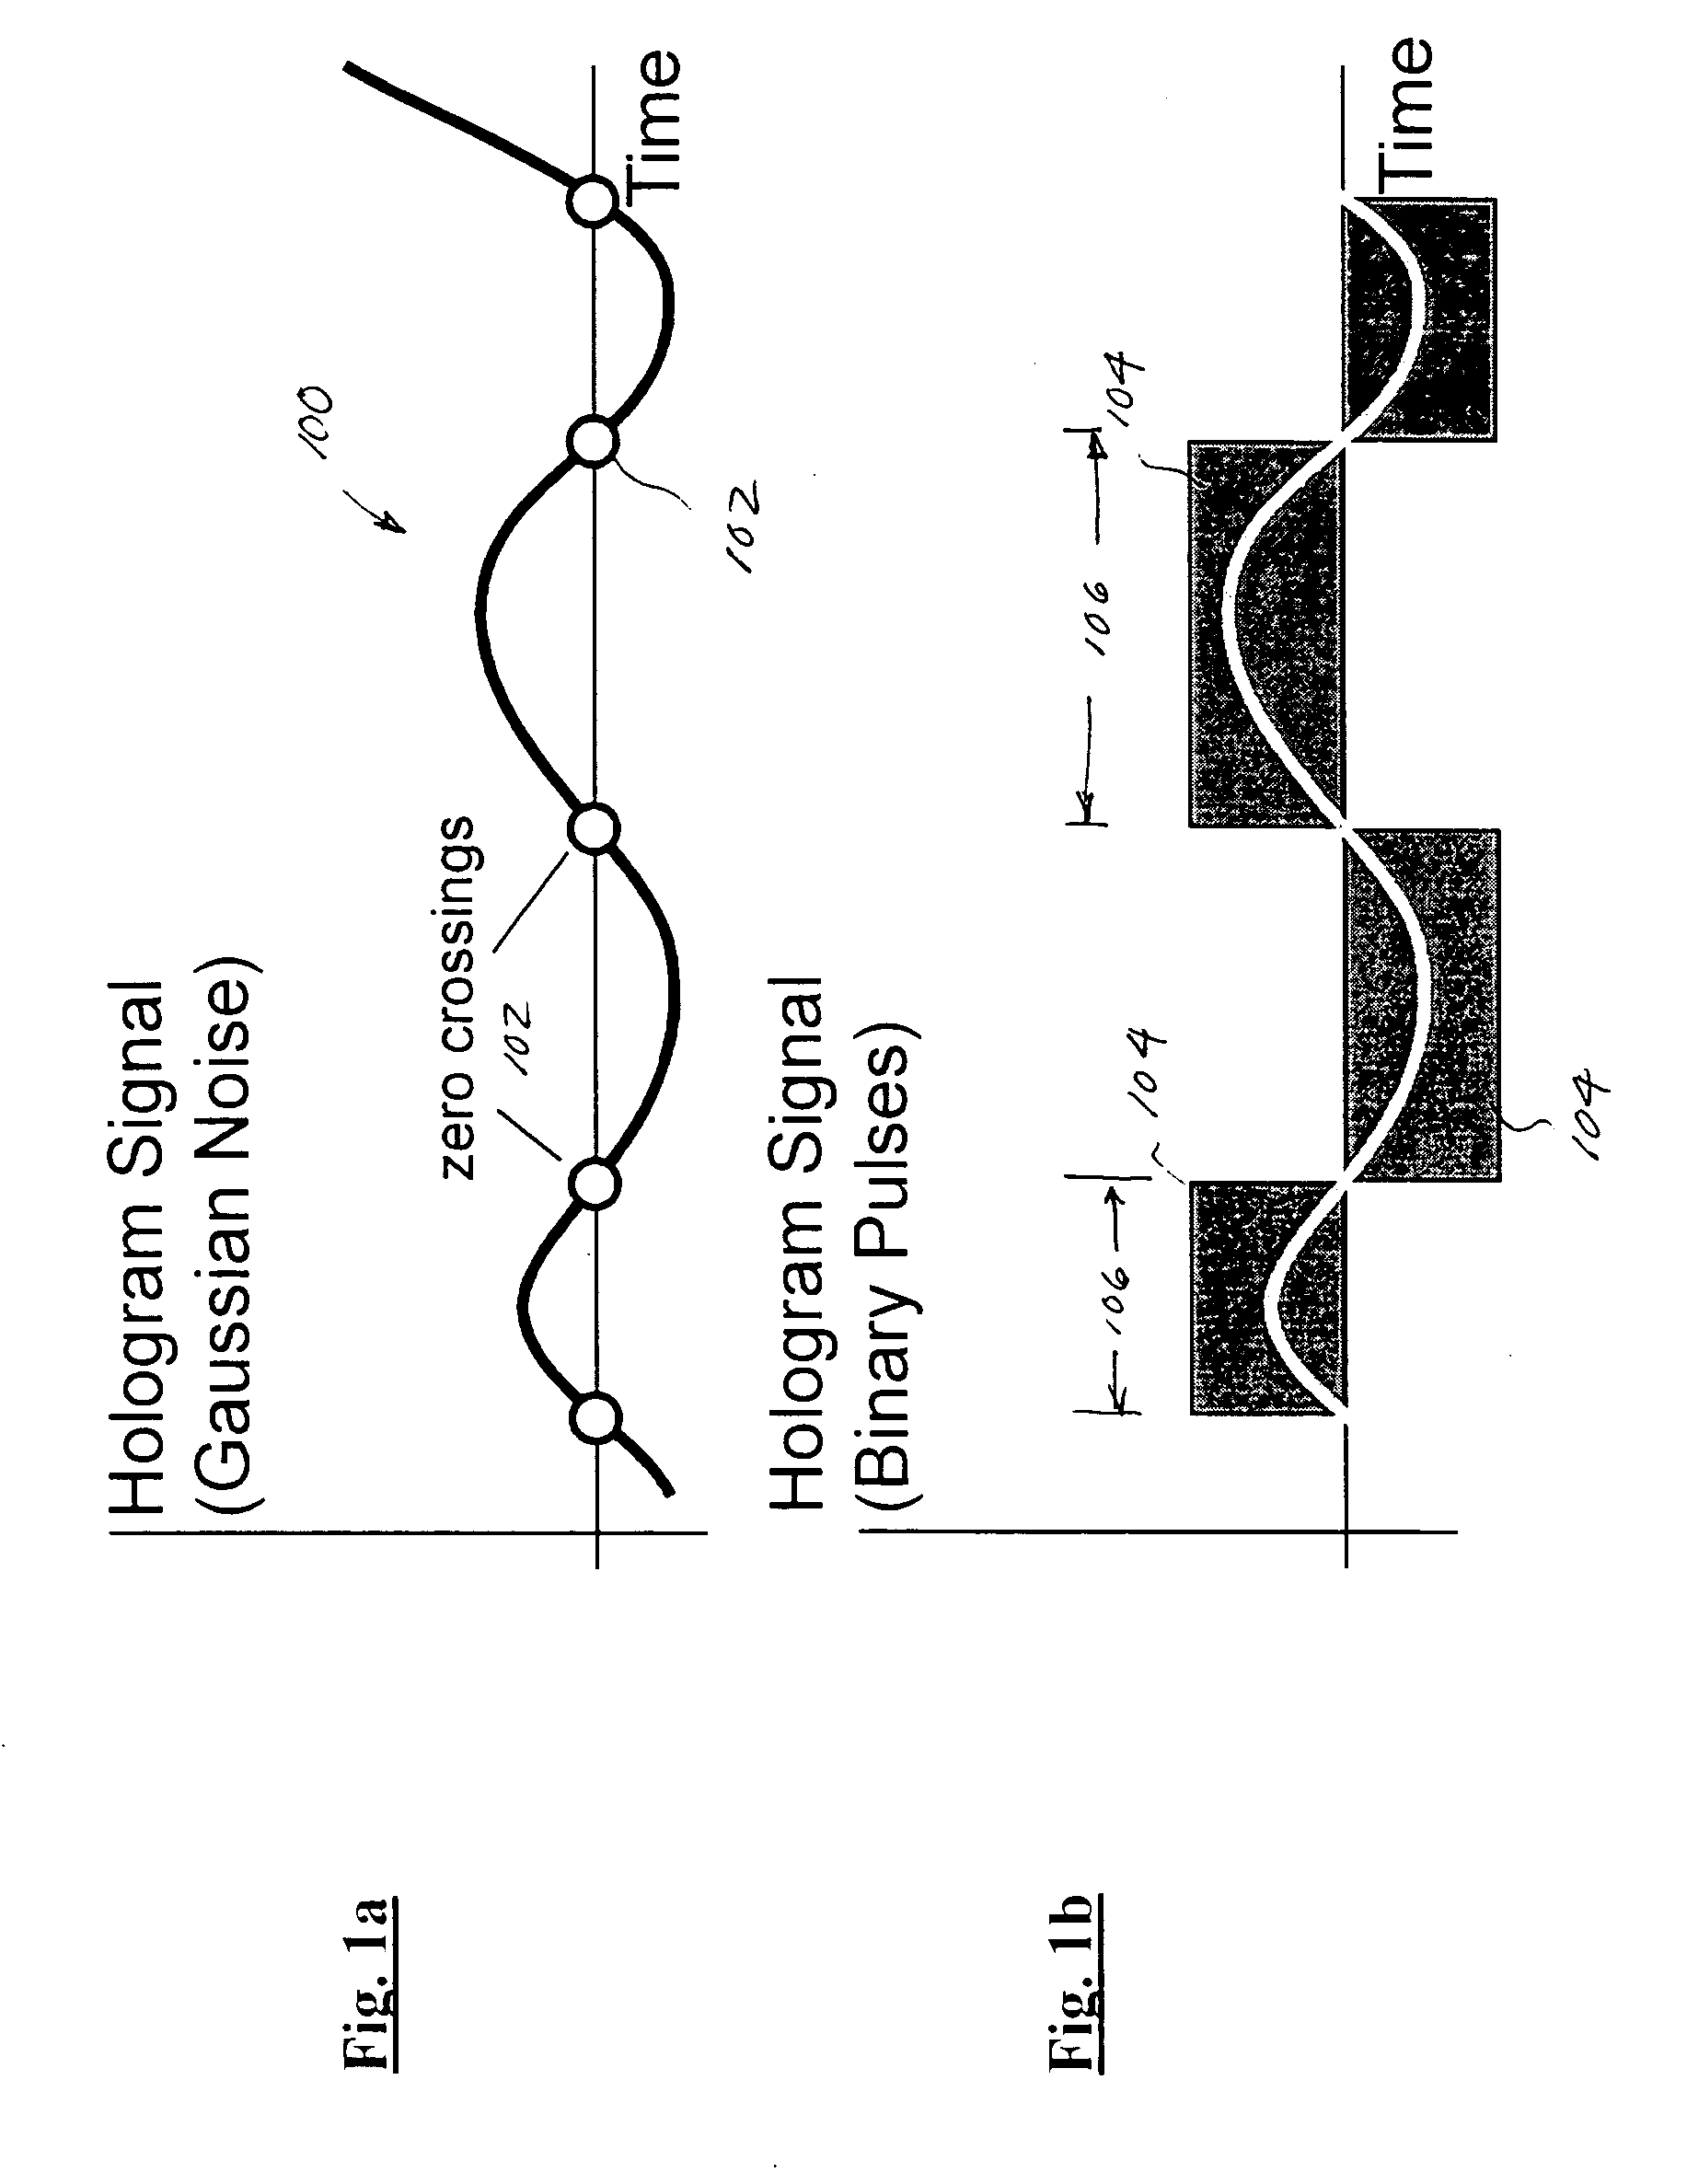 Multipath-adapted holographic communications apparatus and methods